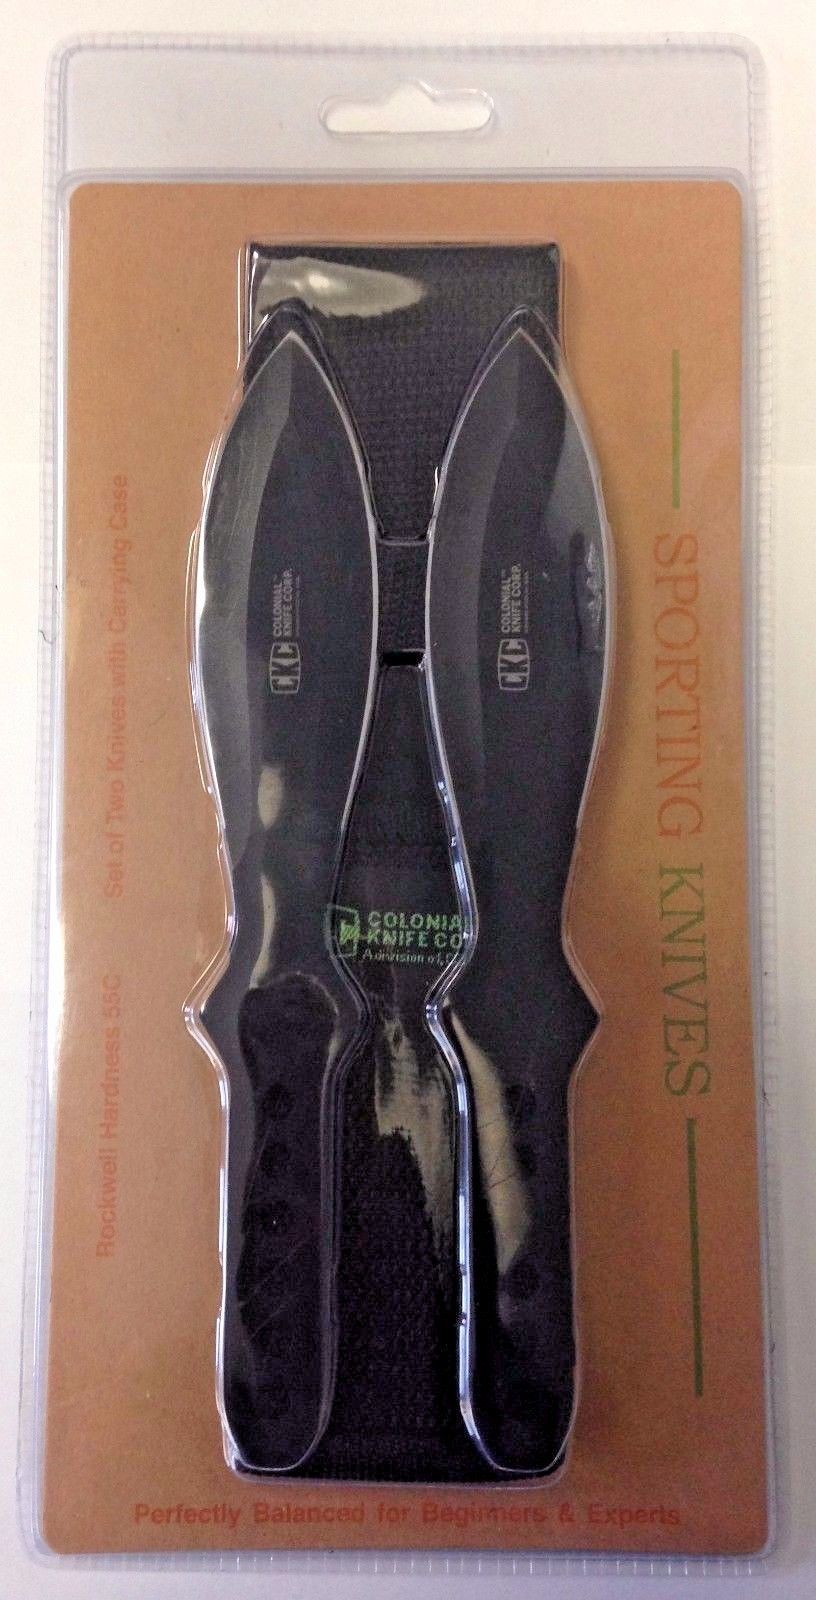 CKC 1081058BLK Colonial Knife Throwing Knives 1 Pair Black Packaged